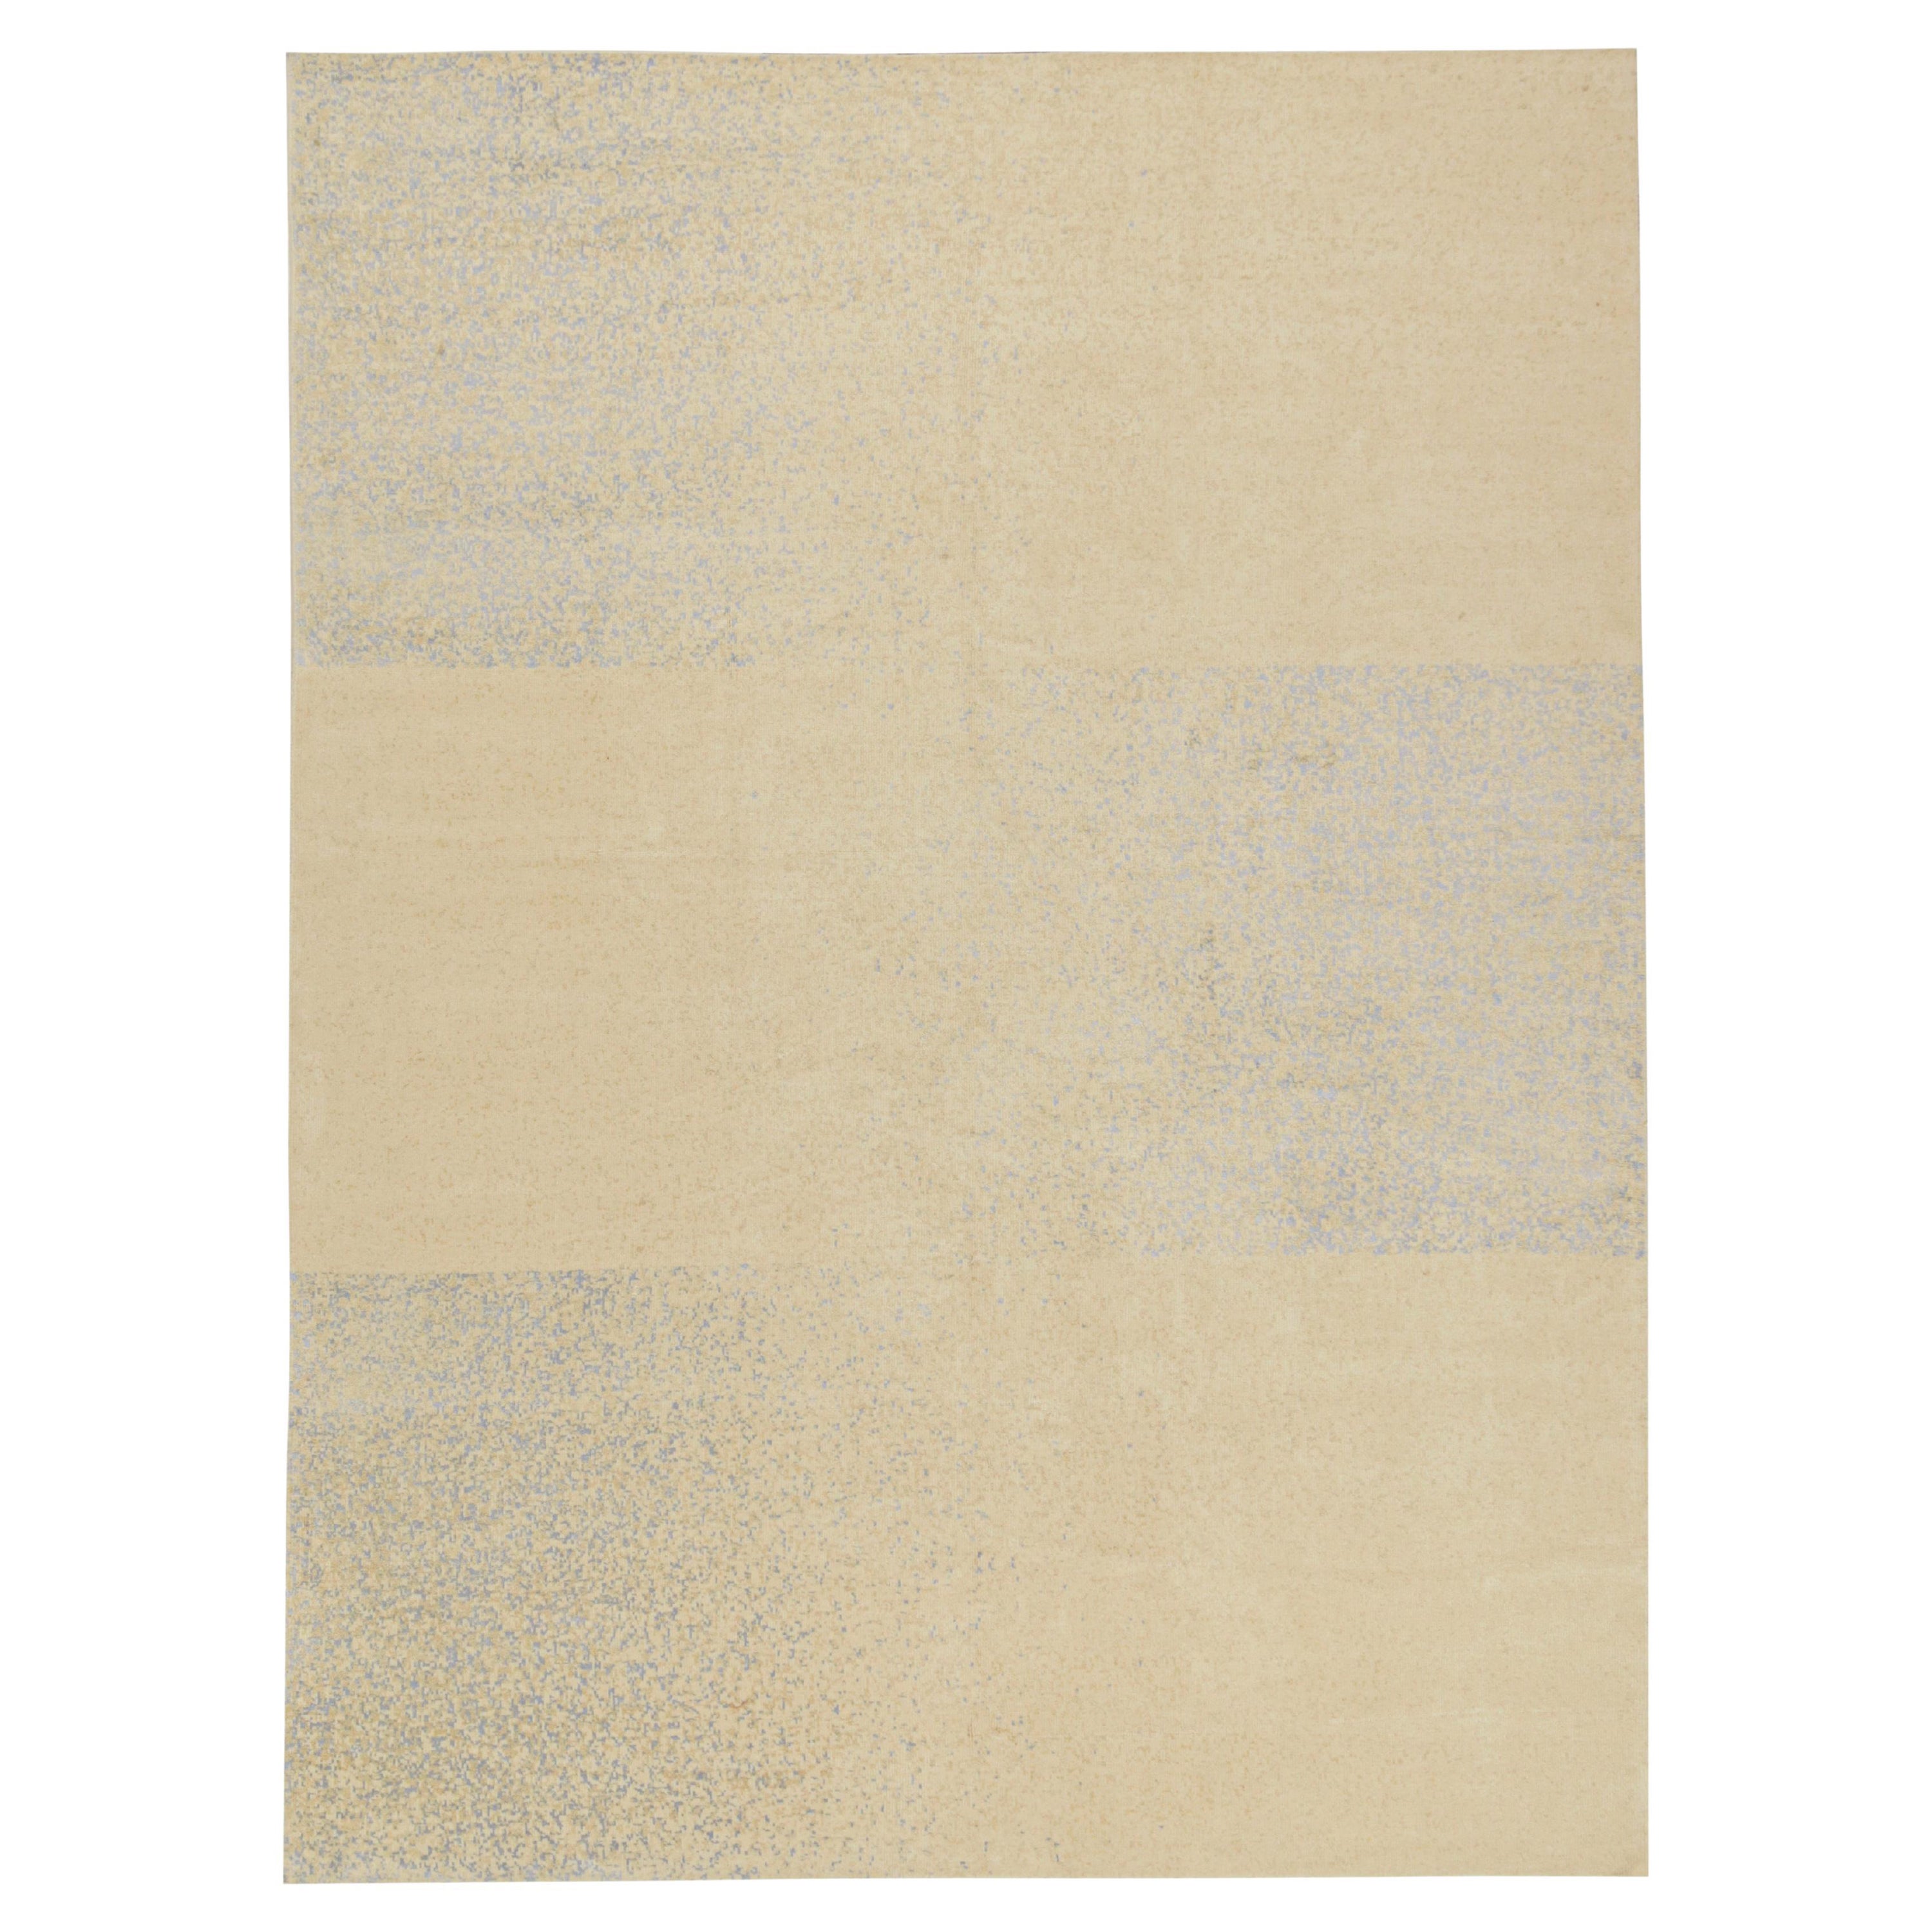 Rug & Kilim’s Modern Rug in Beige with Blue Abstract Geometric Patterns